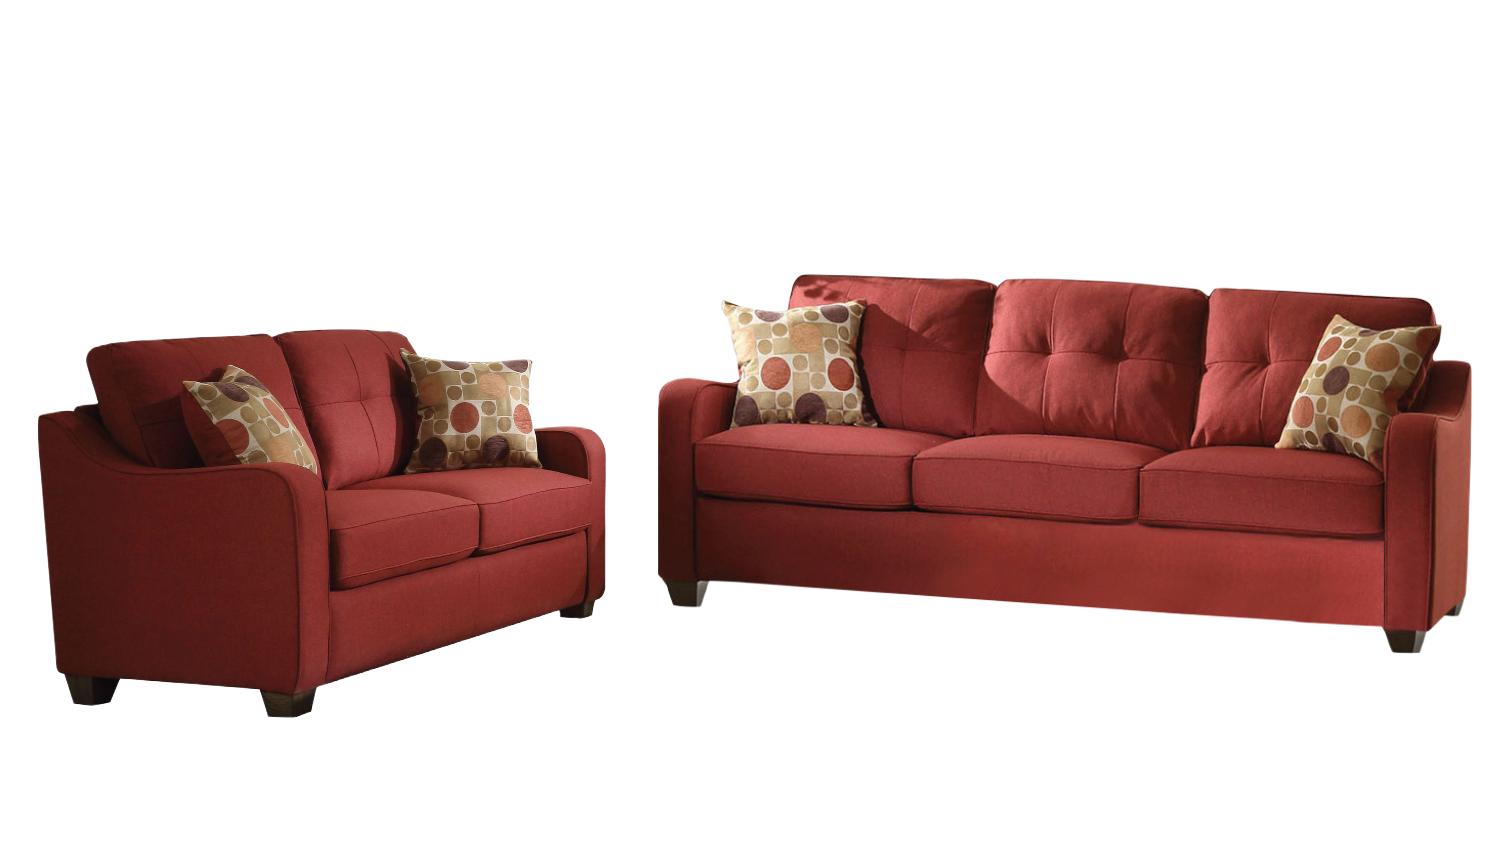 Modern Sofa and Loveseat Cleavon II 53560-2pcs in Red Linen